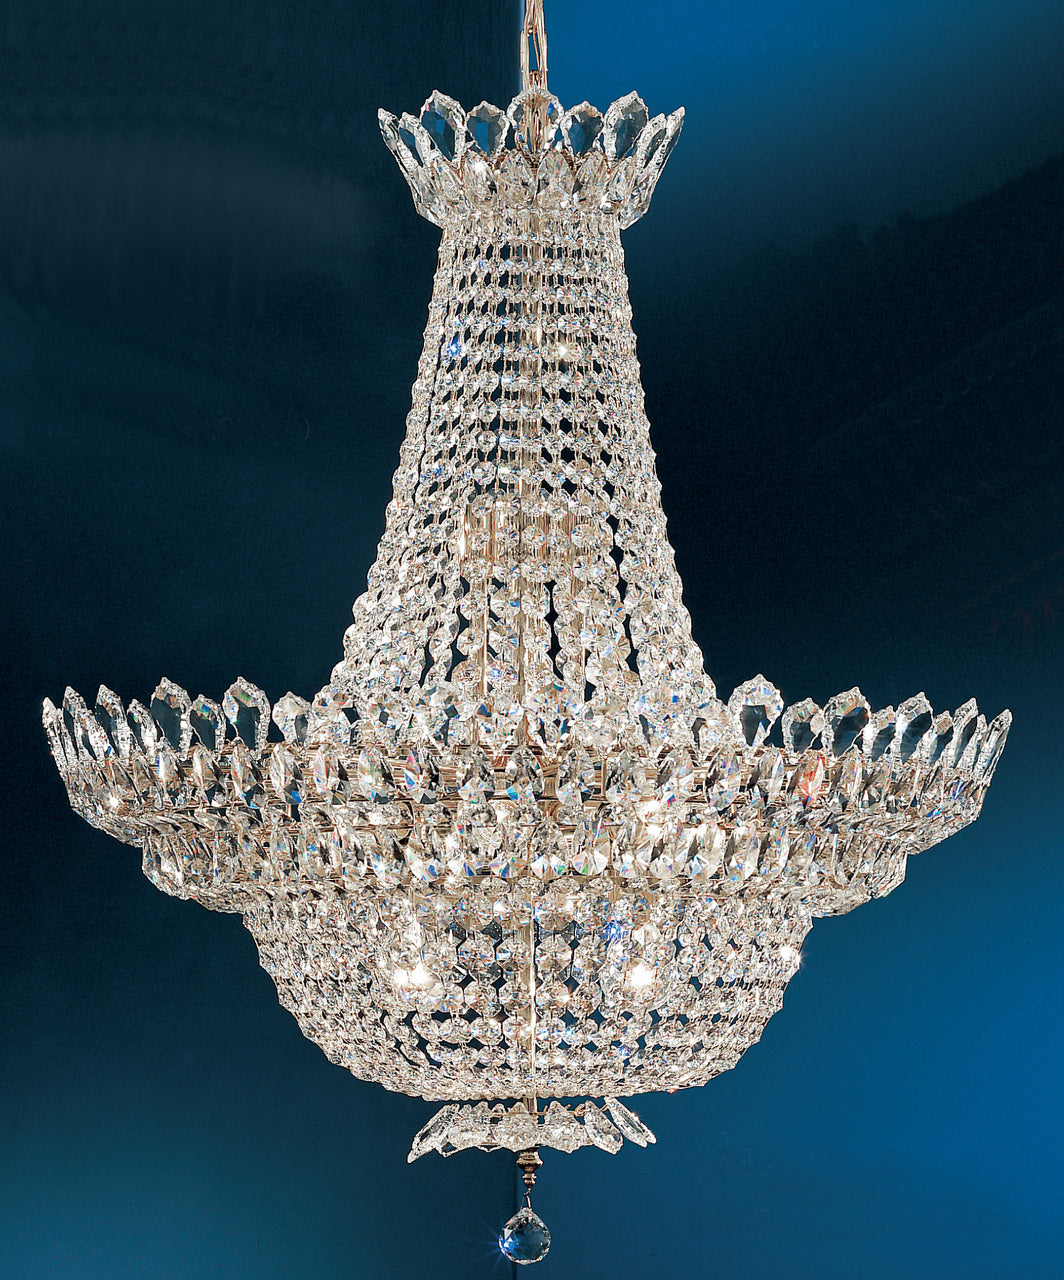 Classic Lighting 1686 CP Tiara Crystal Chandelier in Chrome (Imported from Italy)